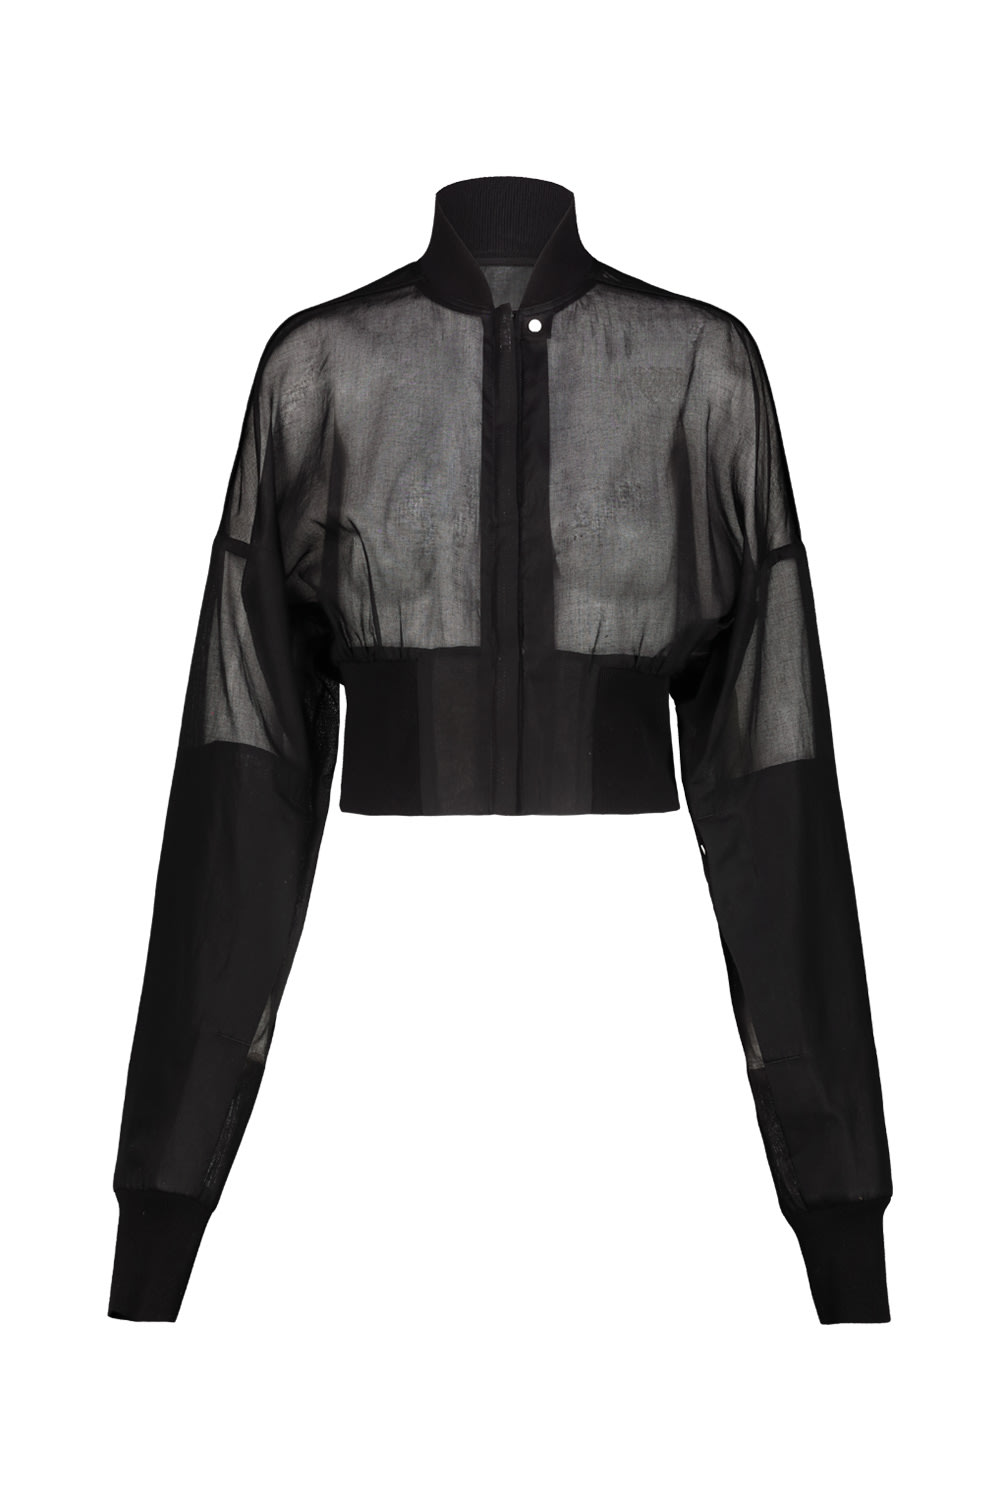 Rick Owens Collage Bomber In Black